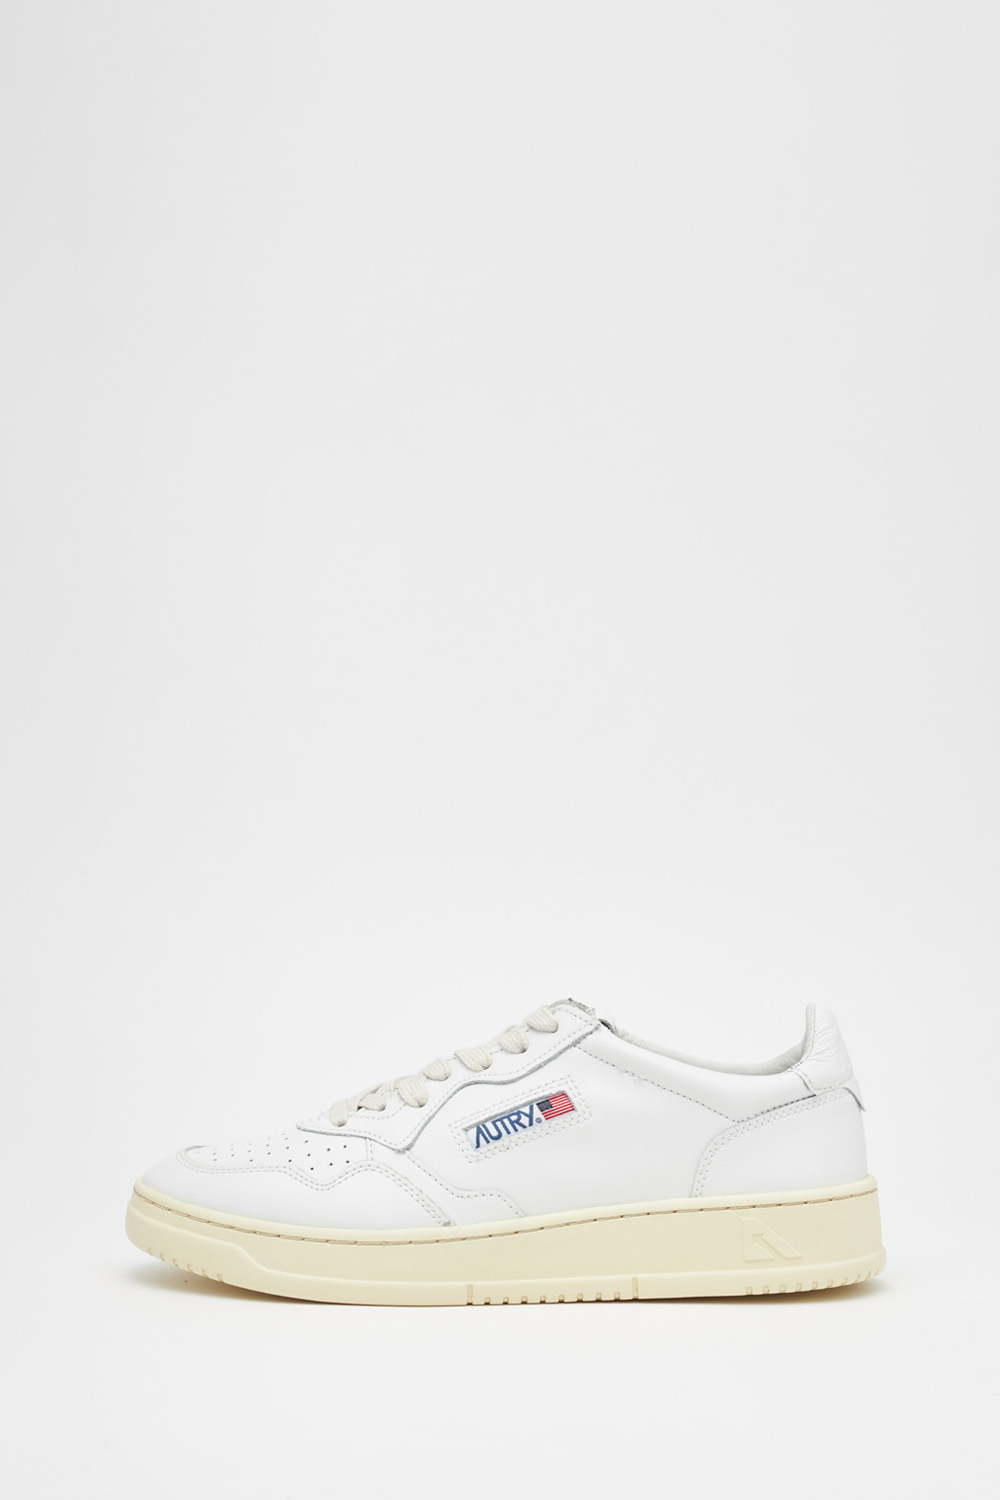 Medalist Sneakers (Leat/Leat)_White